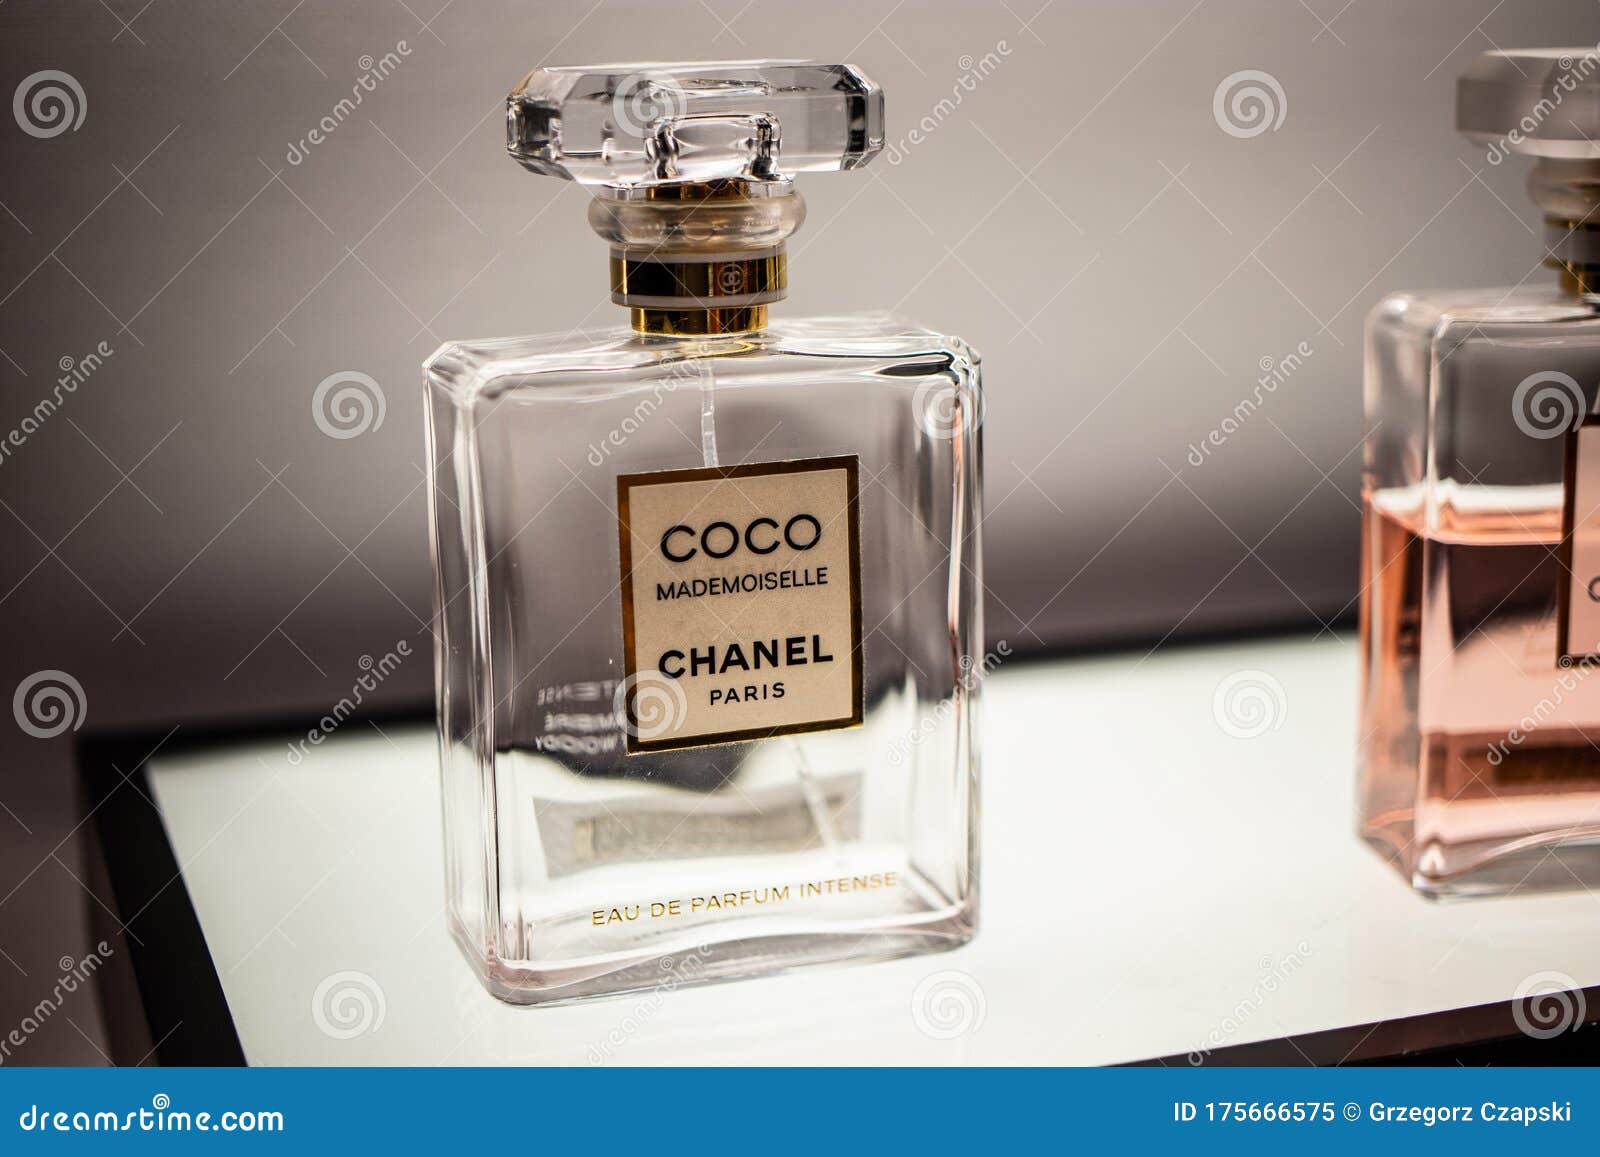 Coco Mademoiselle Chanel Perfume on the Shop Display for Sale Editorial  Image - Image of hygiene, fashion: 175666575